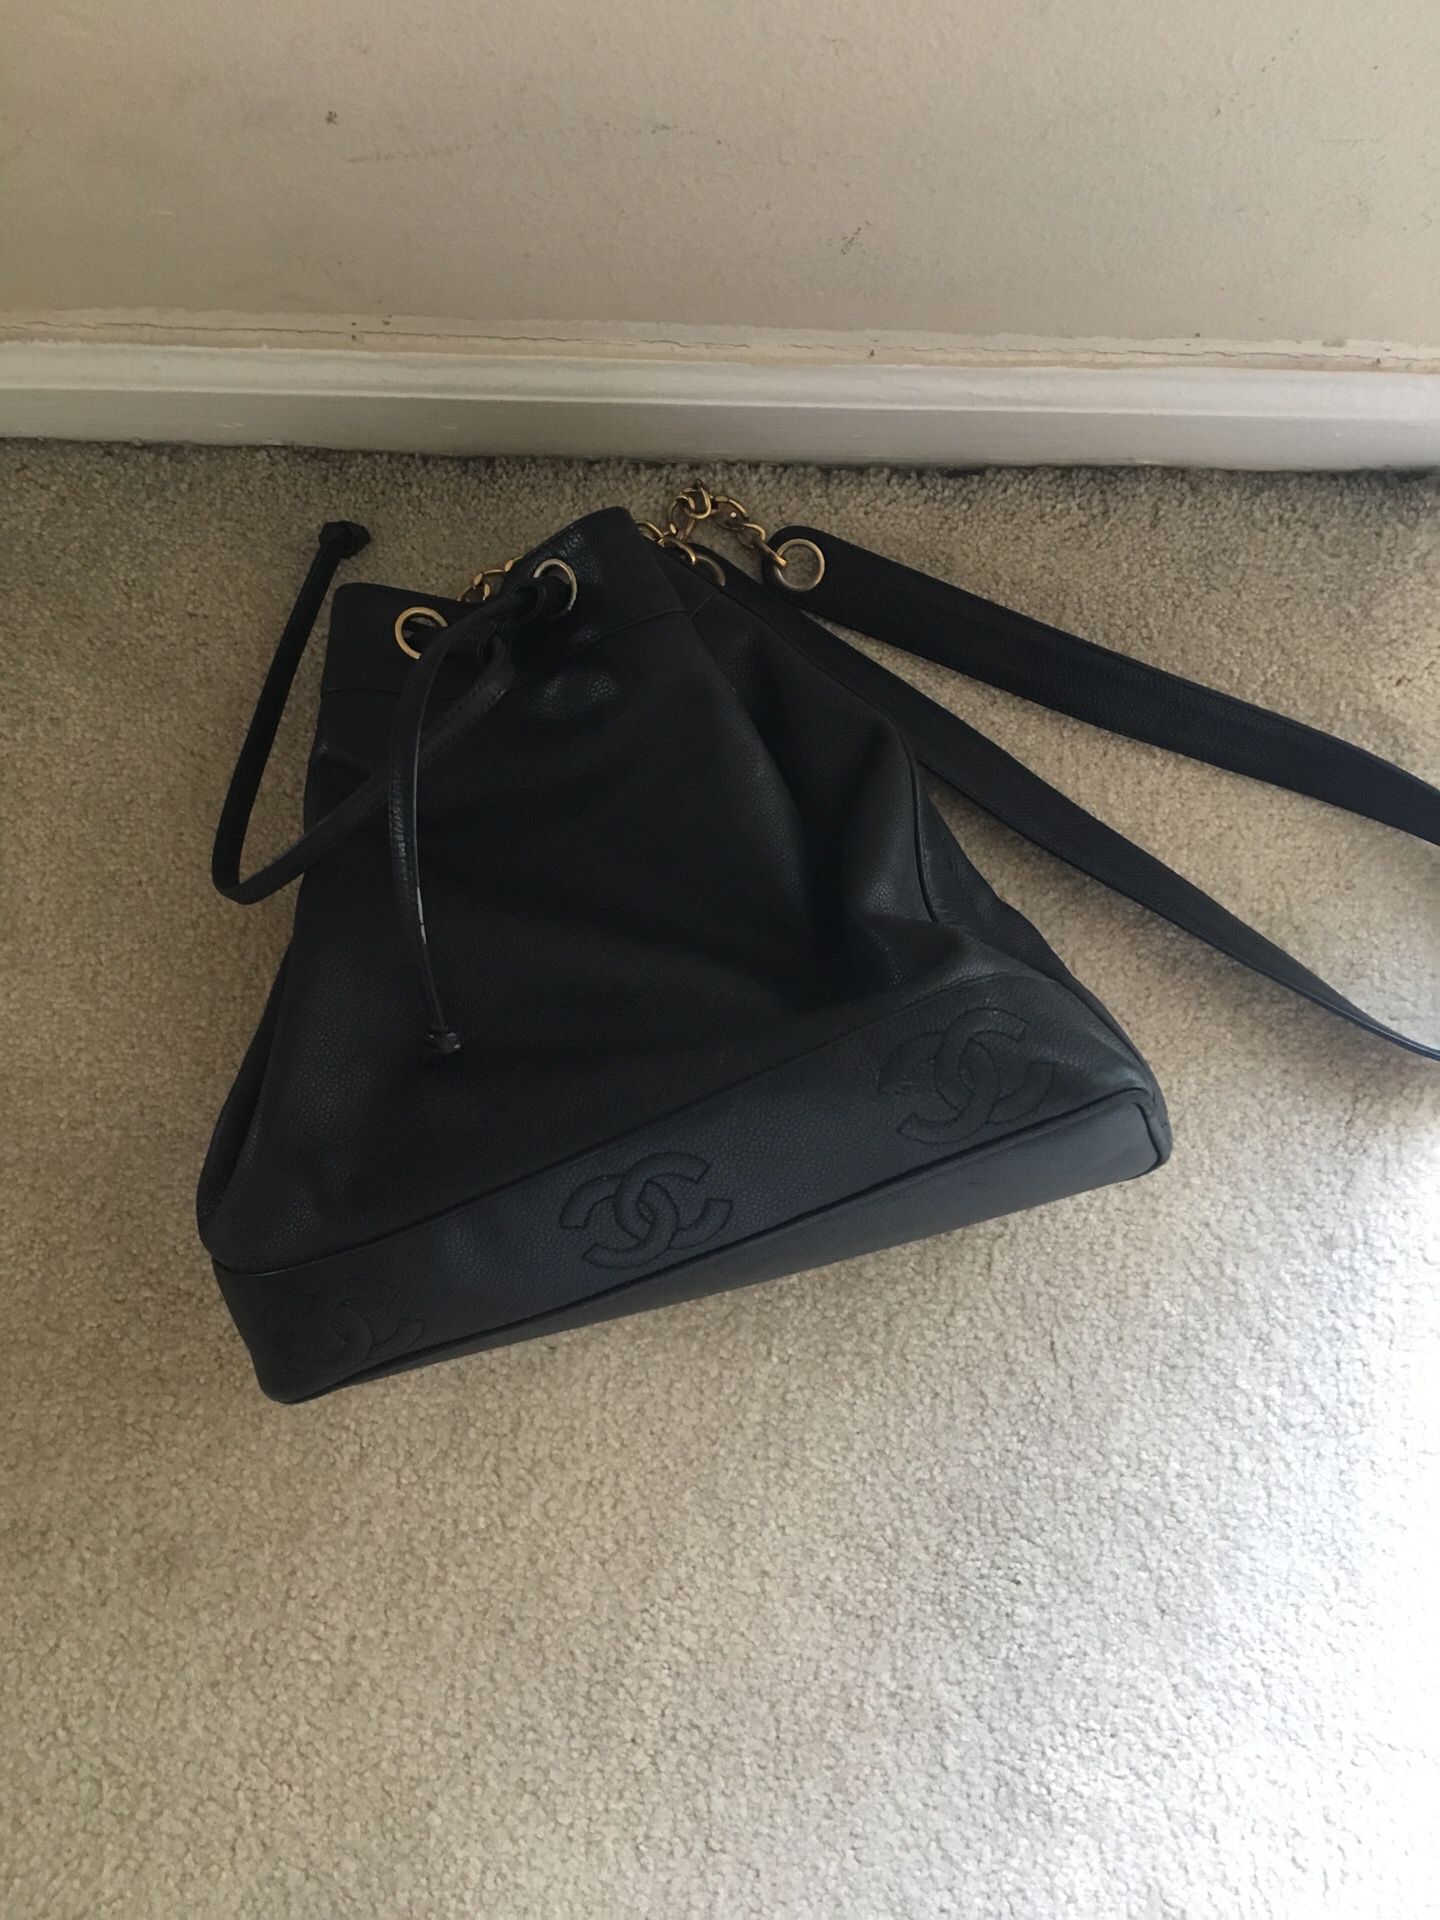 Classic Vintage Chanel Tote for Sale in Boca Raton, FL - OfferUp